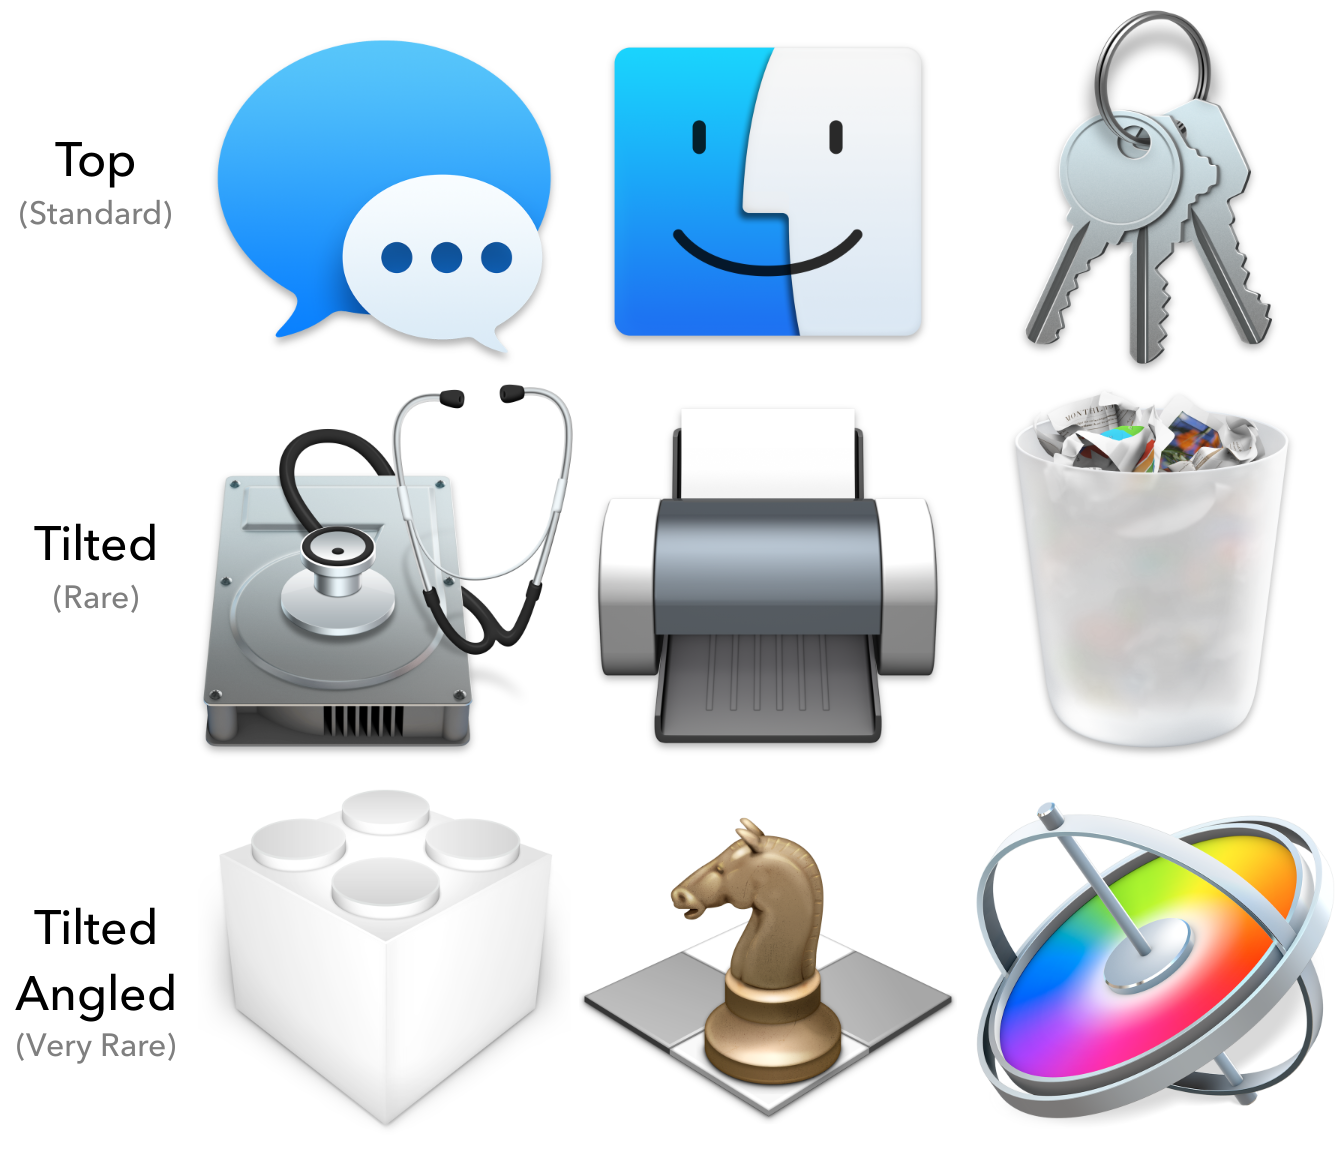 Top (Standard: Messages, Finder, Keychain Access), Tilted (Rare: Disk Utility, Printer, Trash), Tilted Angled (Very Rare: KEXT, Chess, Motion)